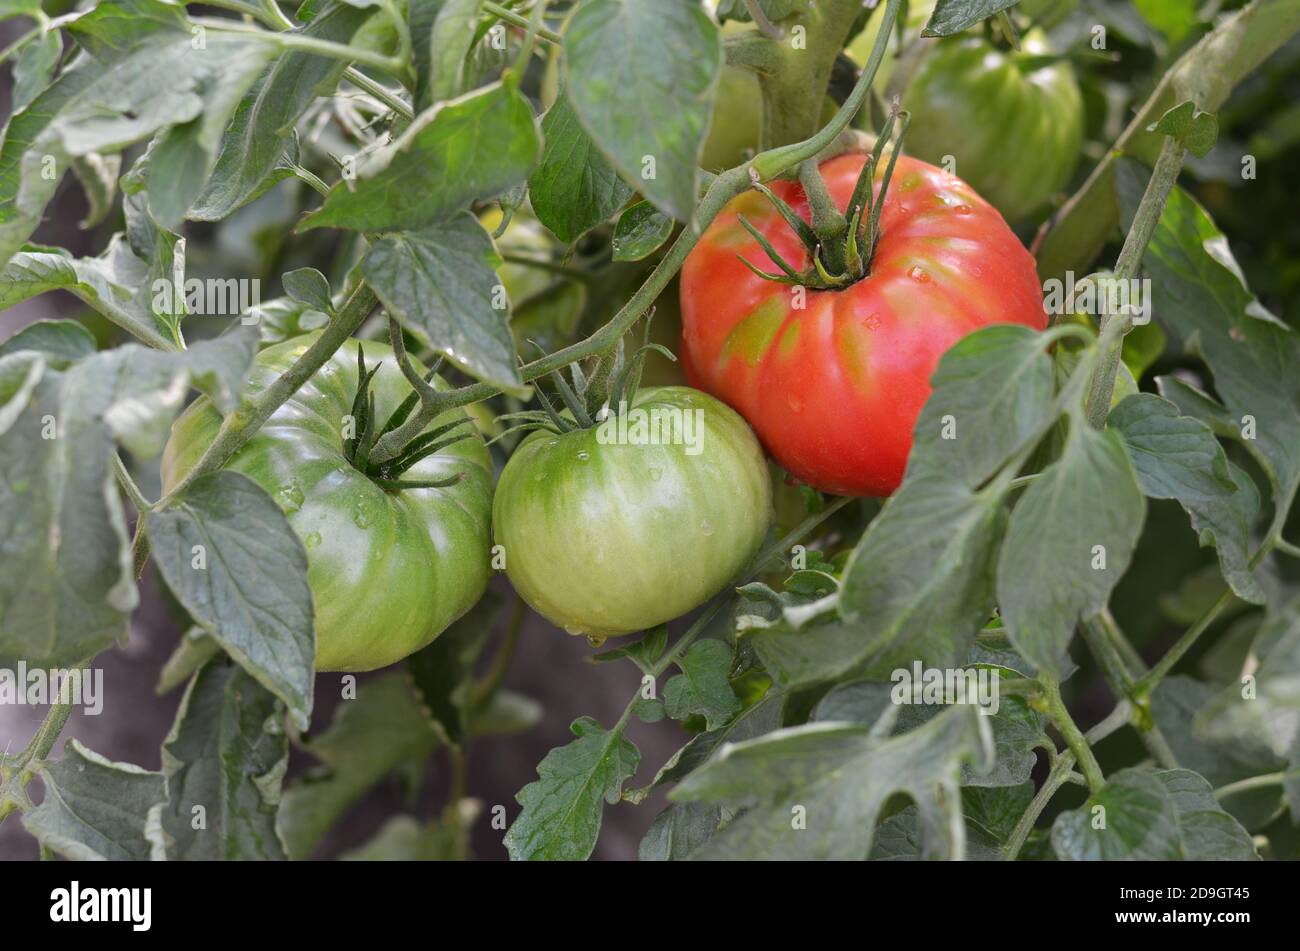 Tomatoes of different ripeness hanging on plant. Close-up Stock Photo